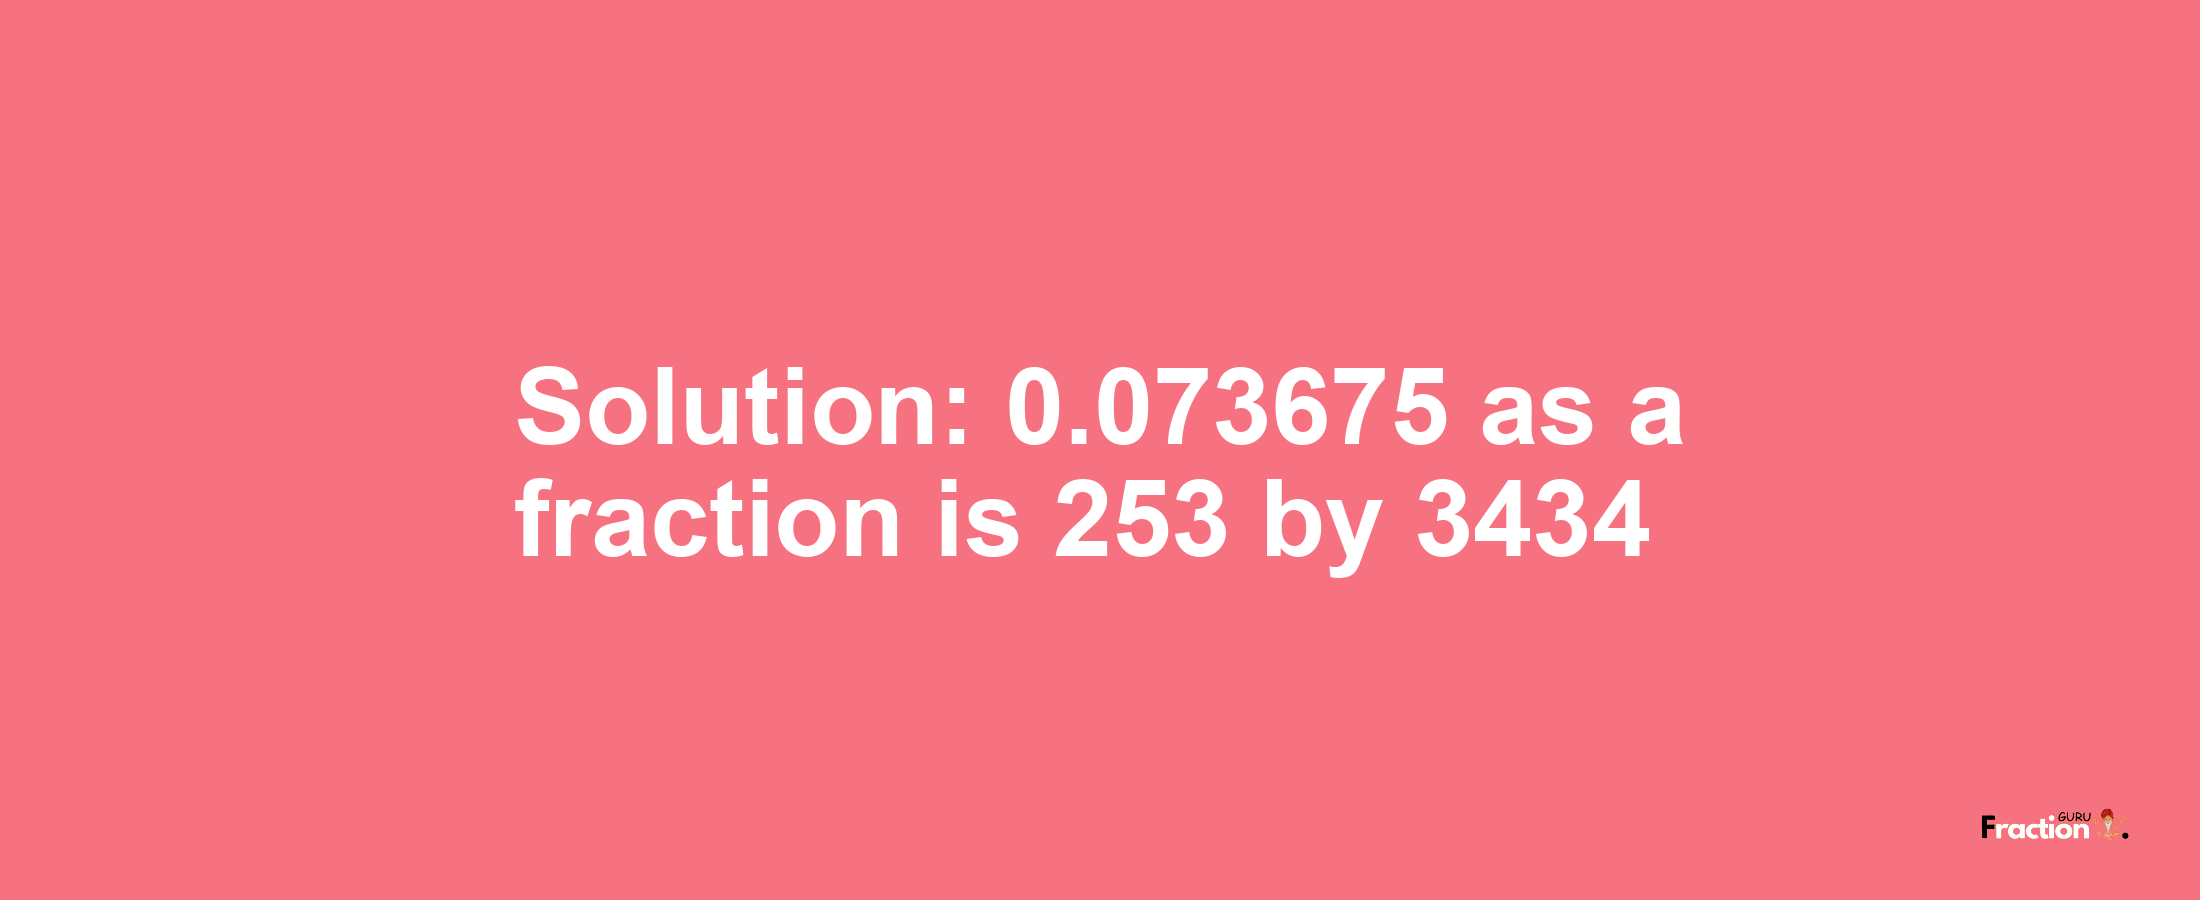 Solution:0.073675 as a fraction is 253/3434